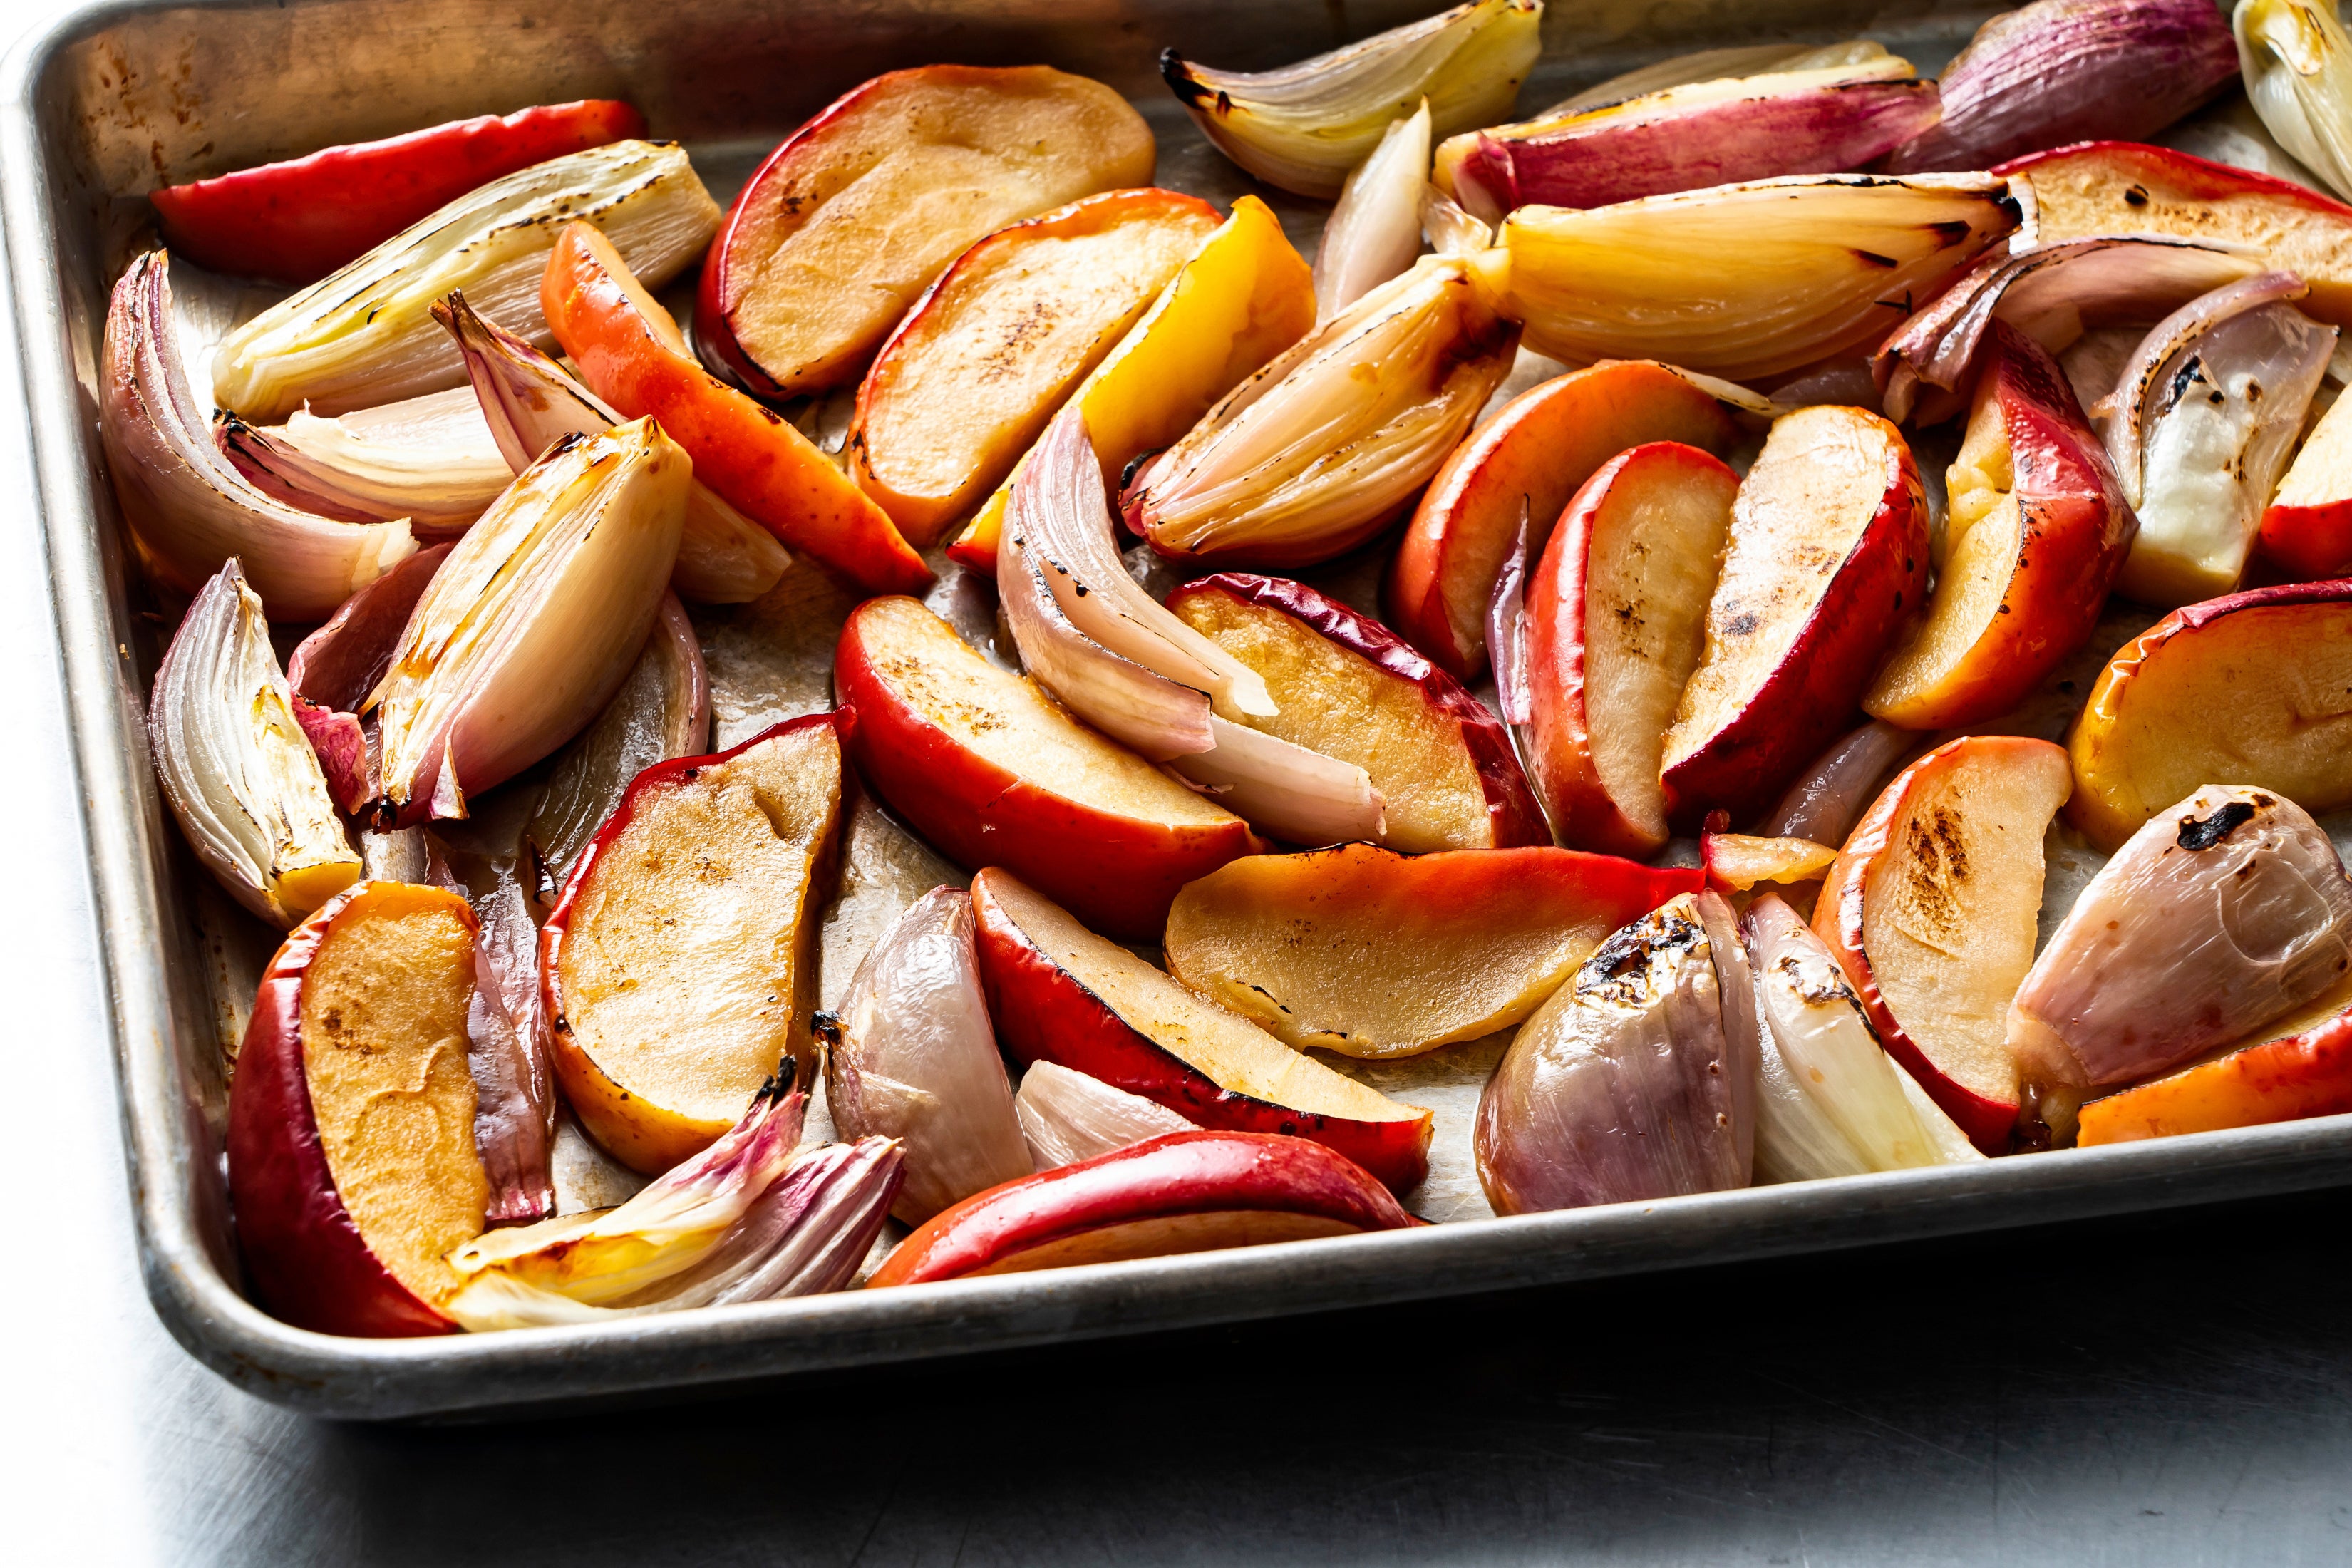 To start, you place wedges of sweet apple and shallot on a sheet pan, toss with a little oil and salt, and cook until they have become soft, sweet and beautifully browned